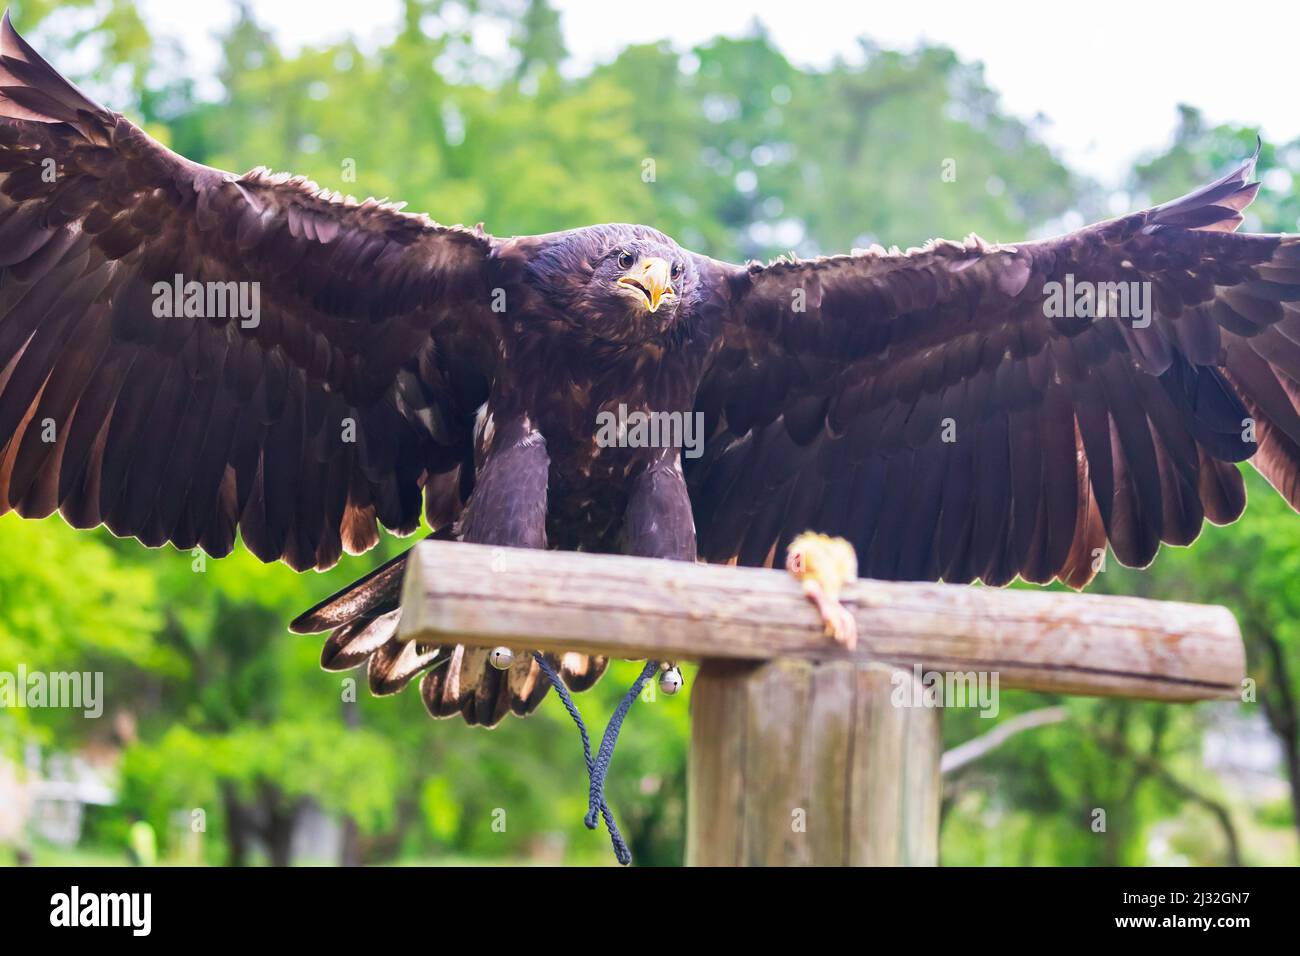 Haliaeetus albicilla - Sea Eagle - falconry guided by landing on a wooden beam. The eagle has its legs outstretched with its claws ready to land. Stock Photo